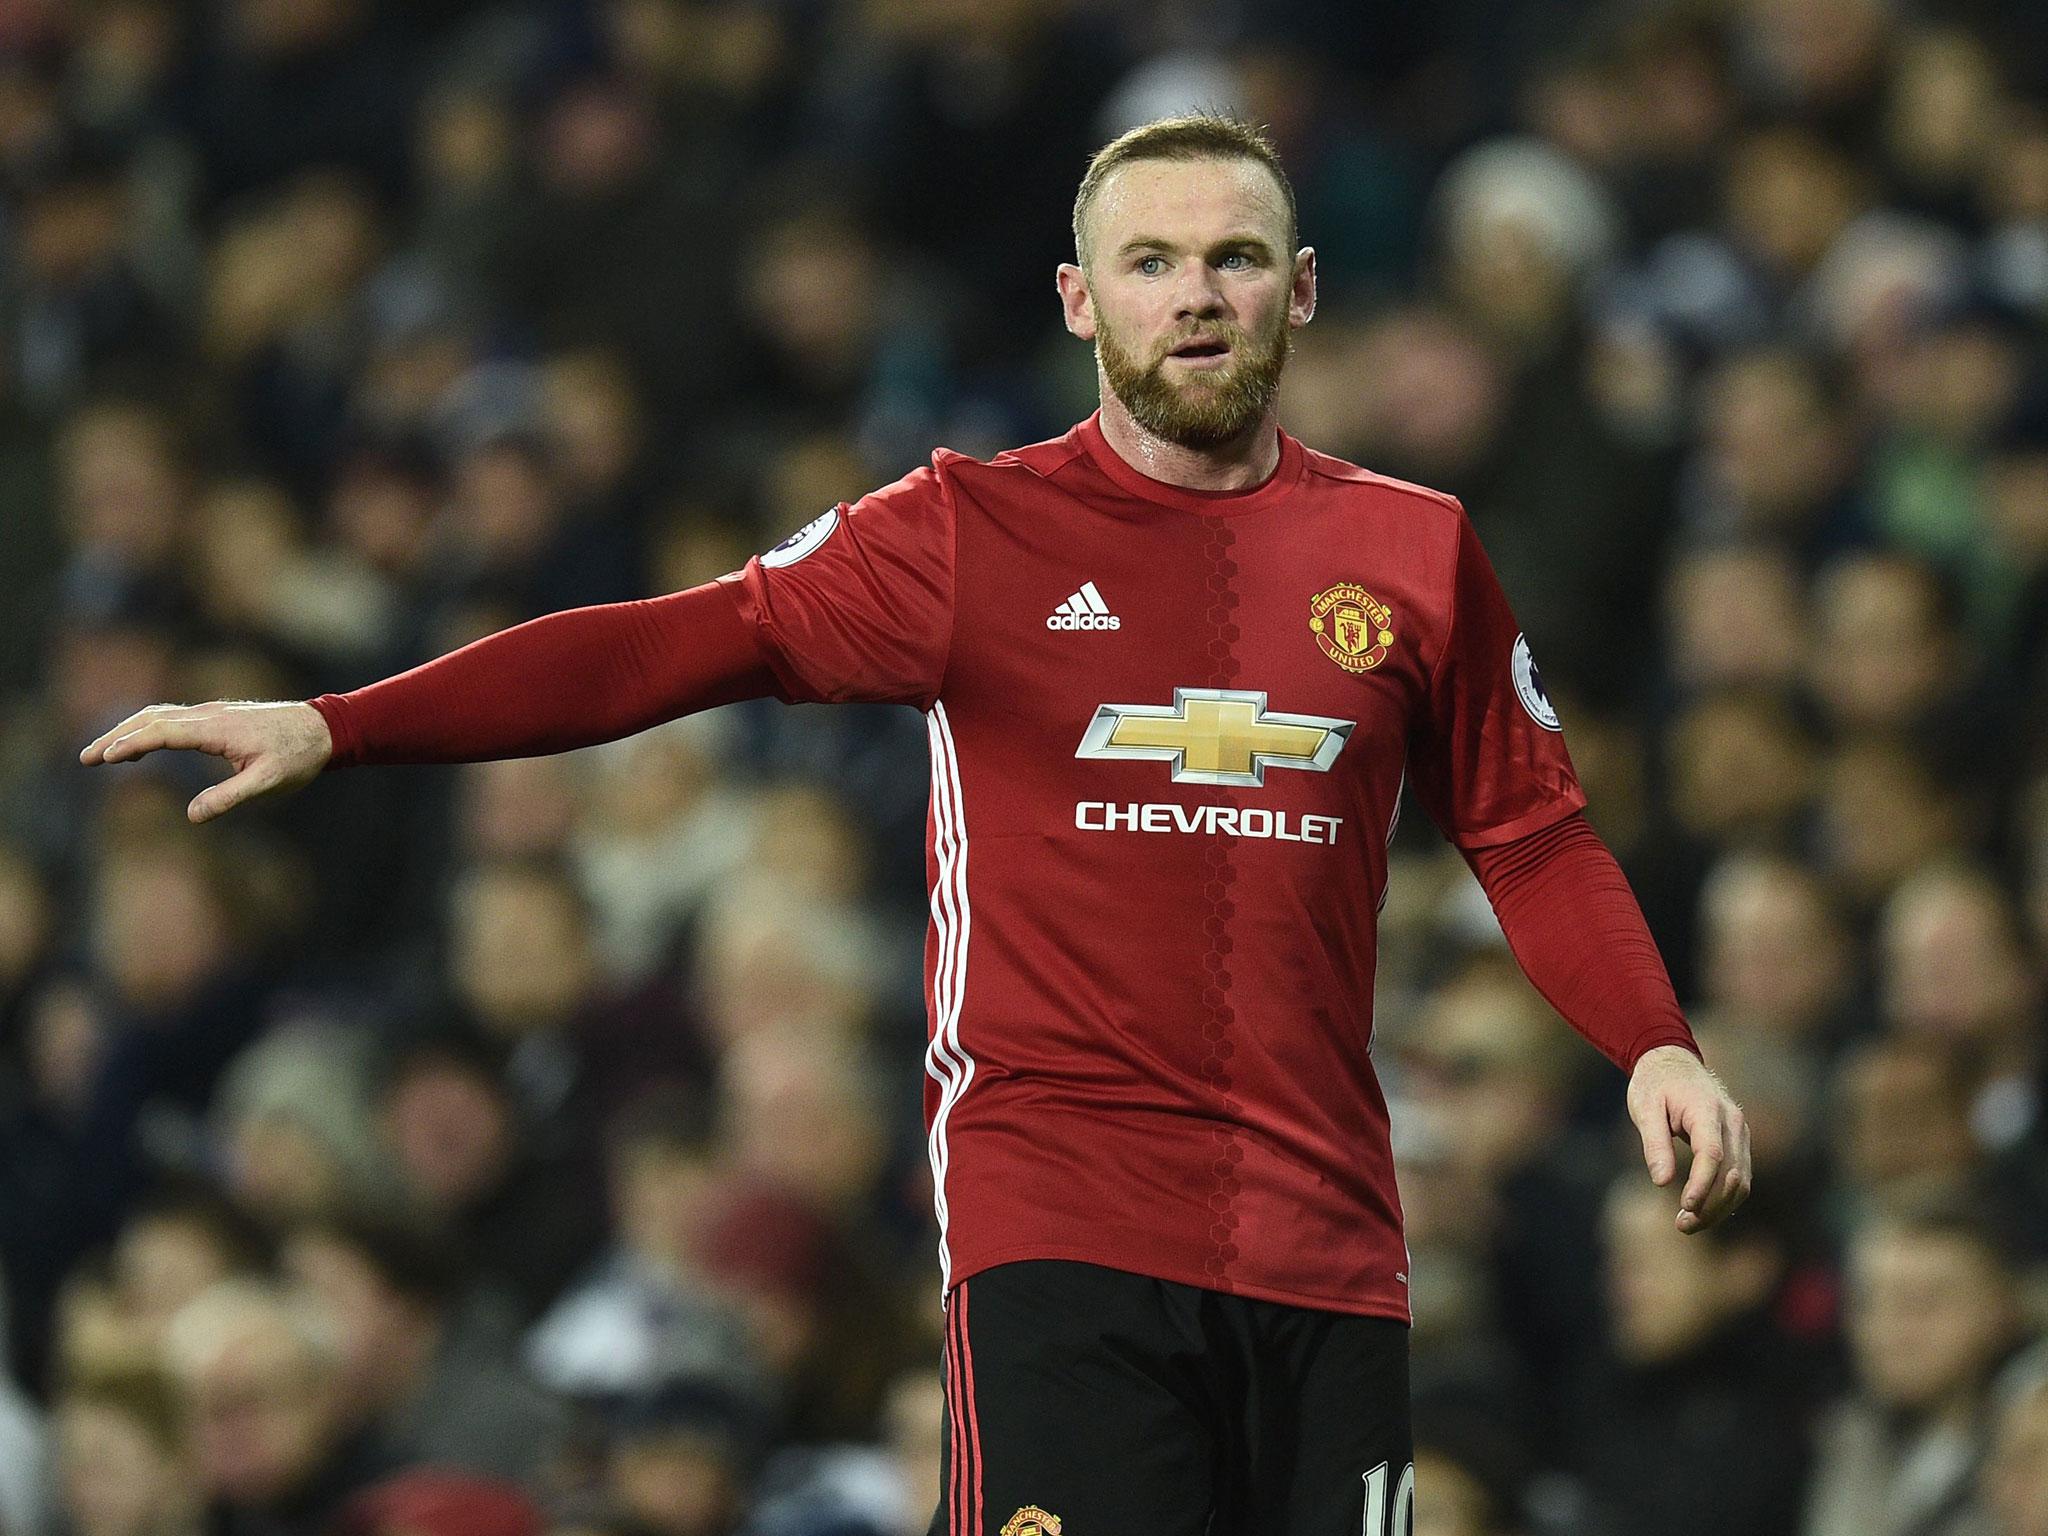 Rooney hasn't played since the 2-0 win over West Brom